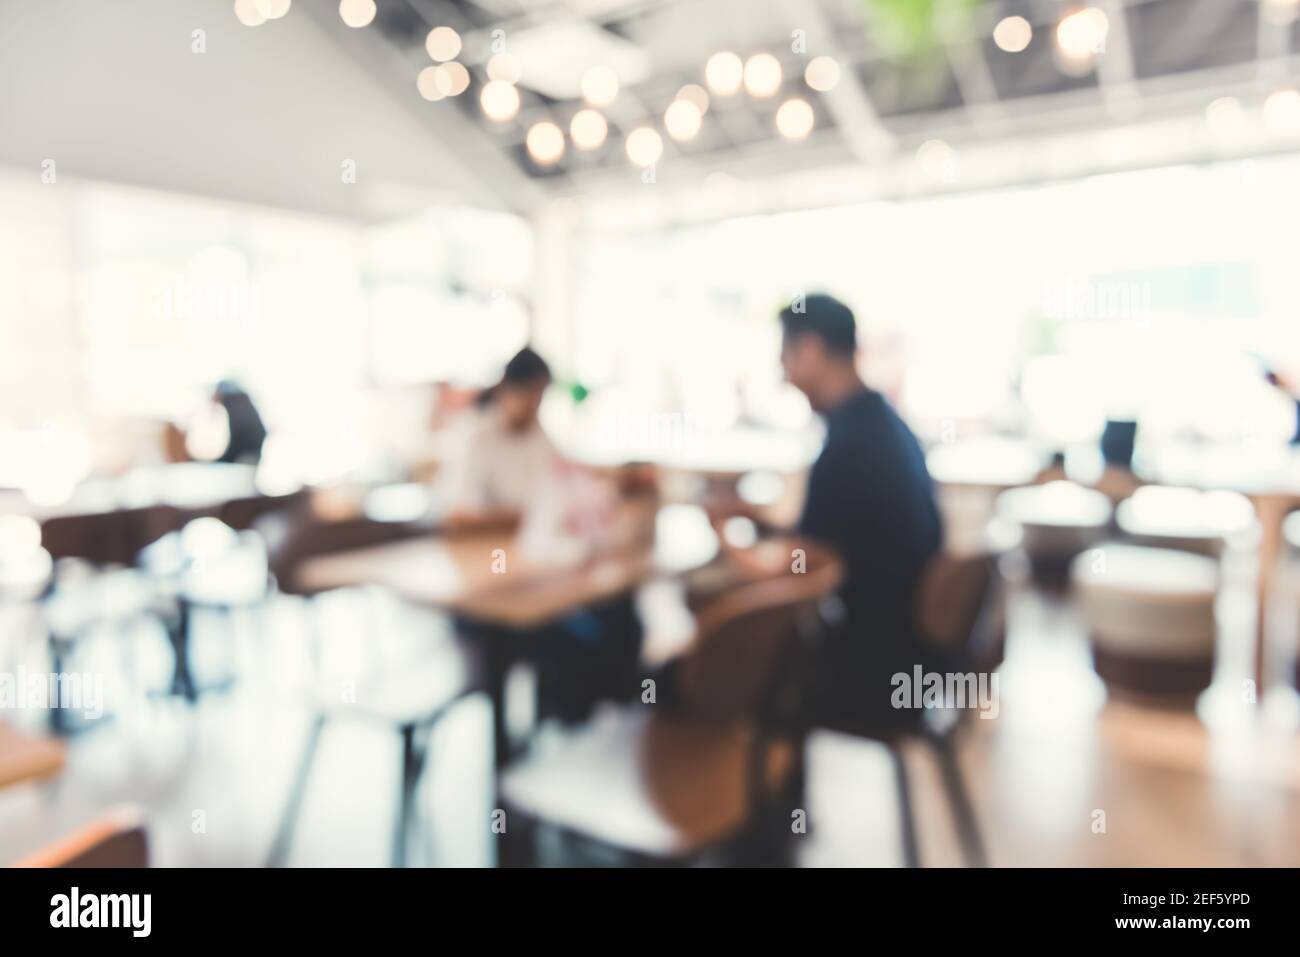 Blur restaurant (cafe) interior with people - abstract background Stock Photo